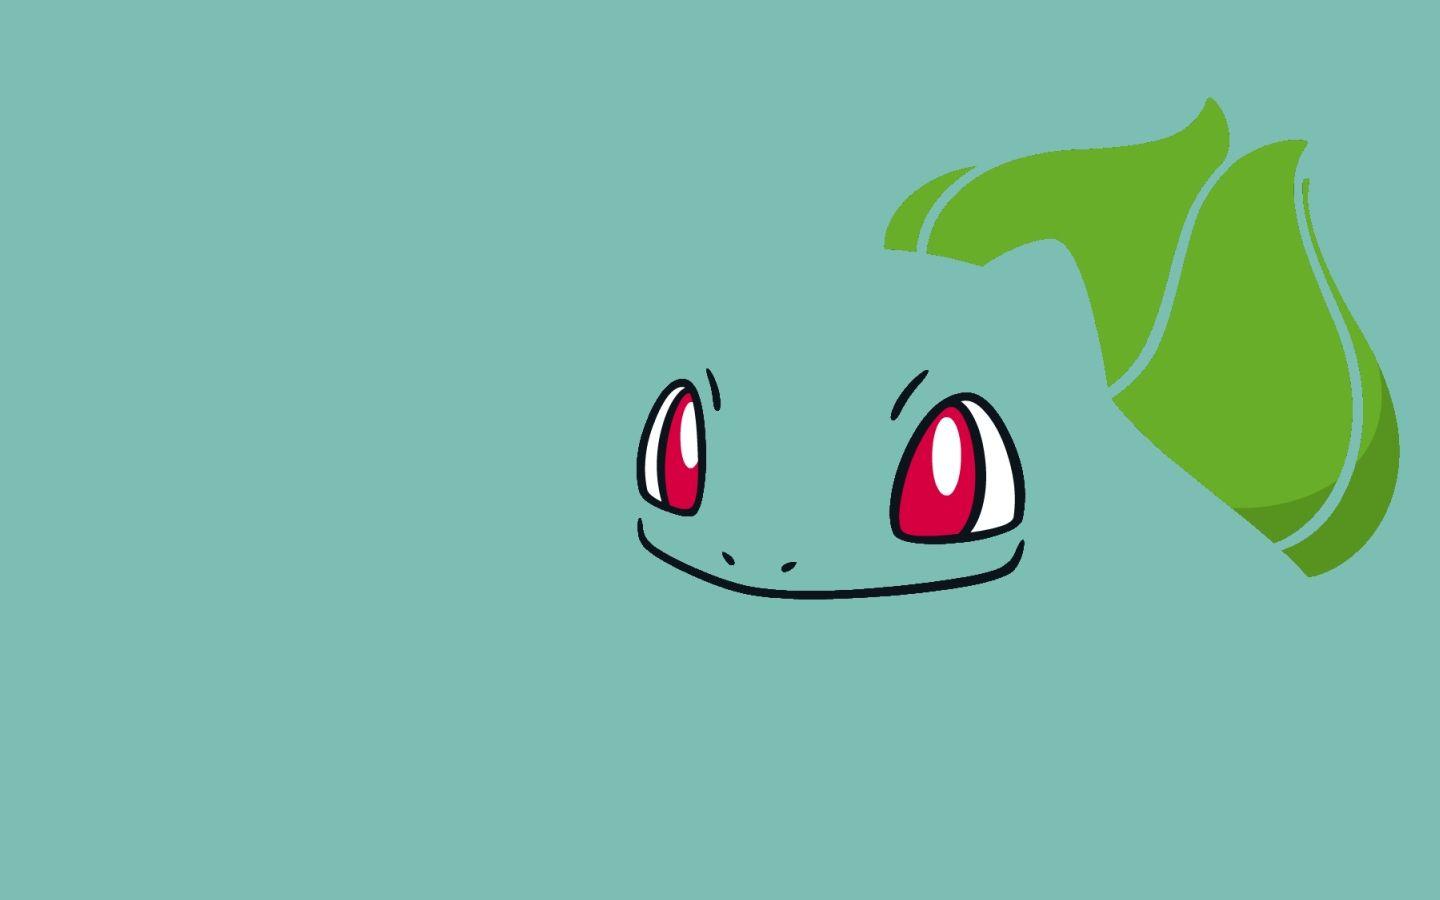 Bulbasaur wallpapers by TheDMWarrior